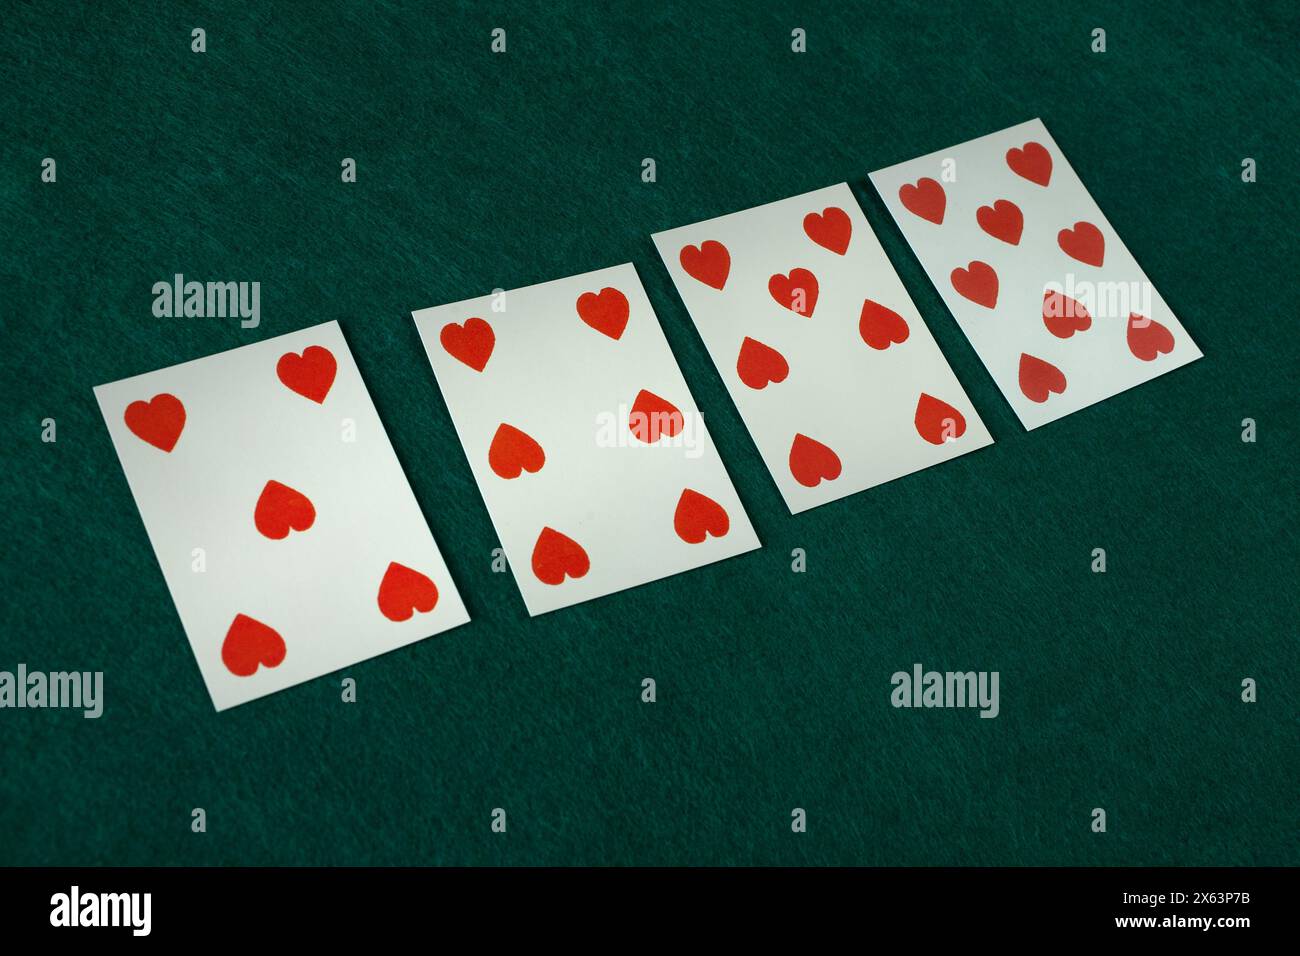 Old west era playing card on on green gambling table. 5, 6, 7, 8 of hearts. Stock Photo